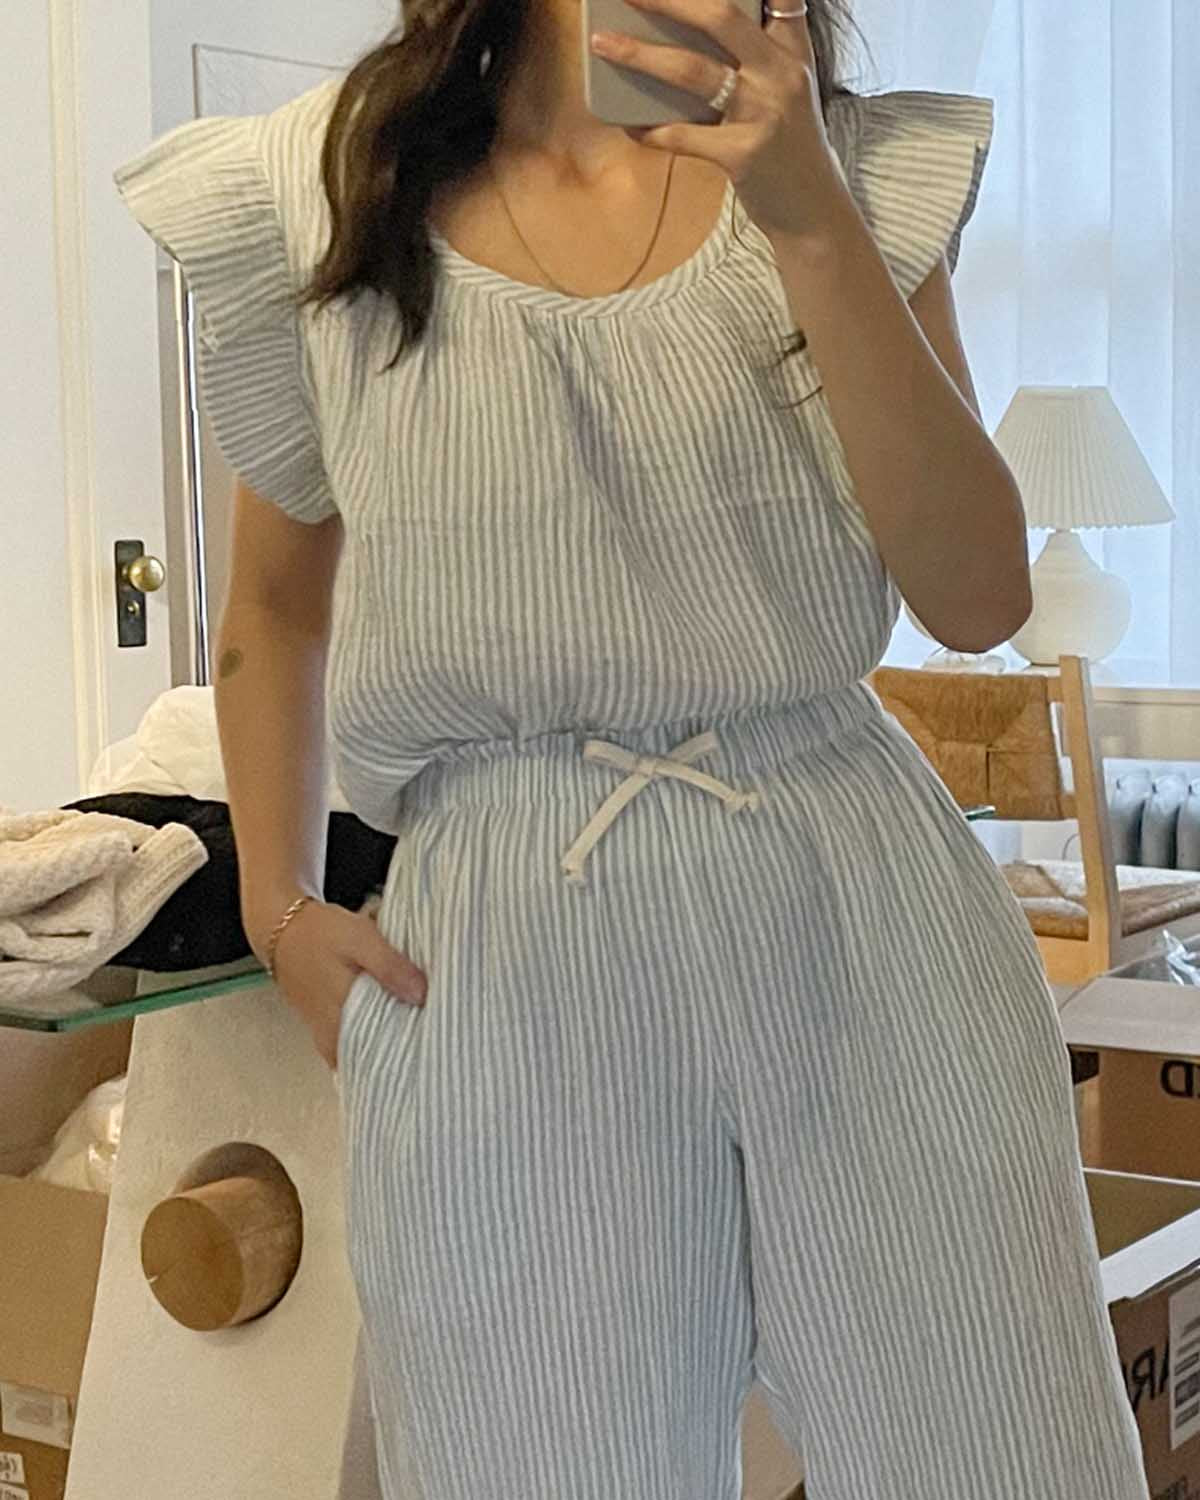 blue and white striped pj